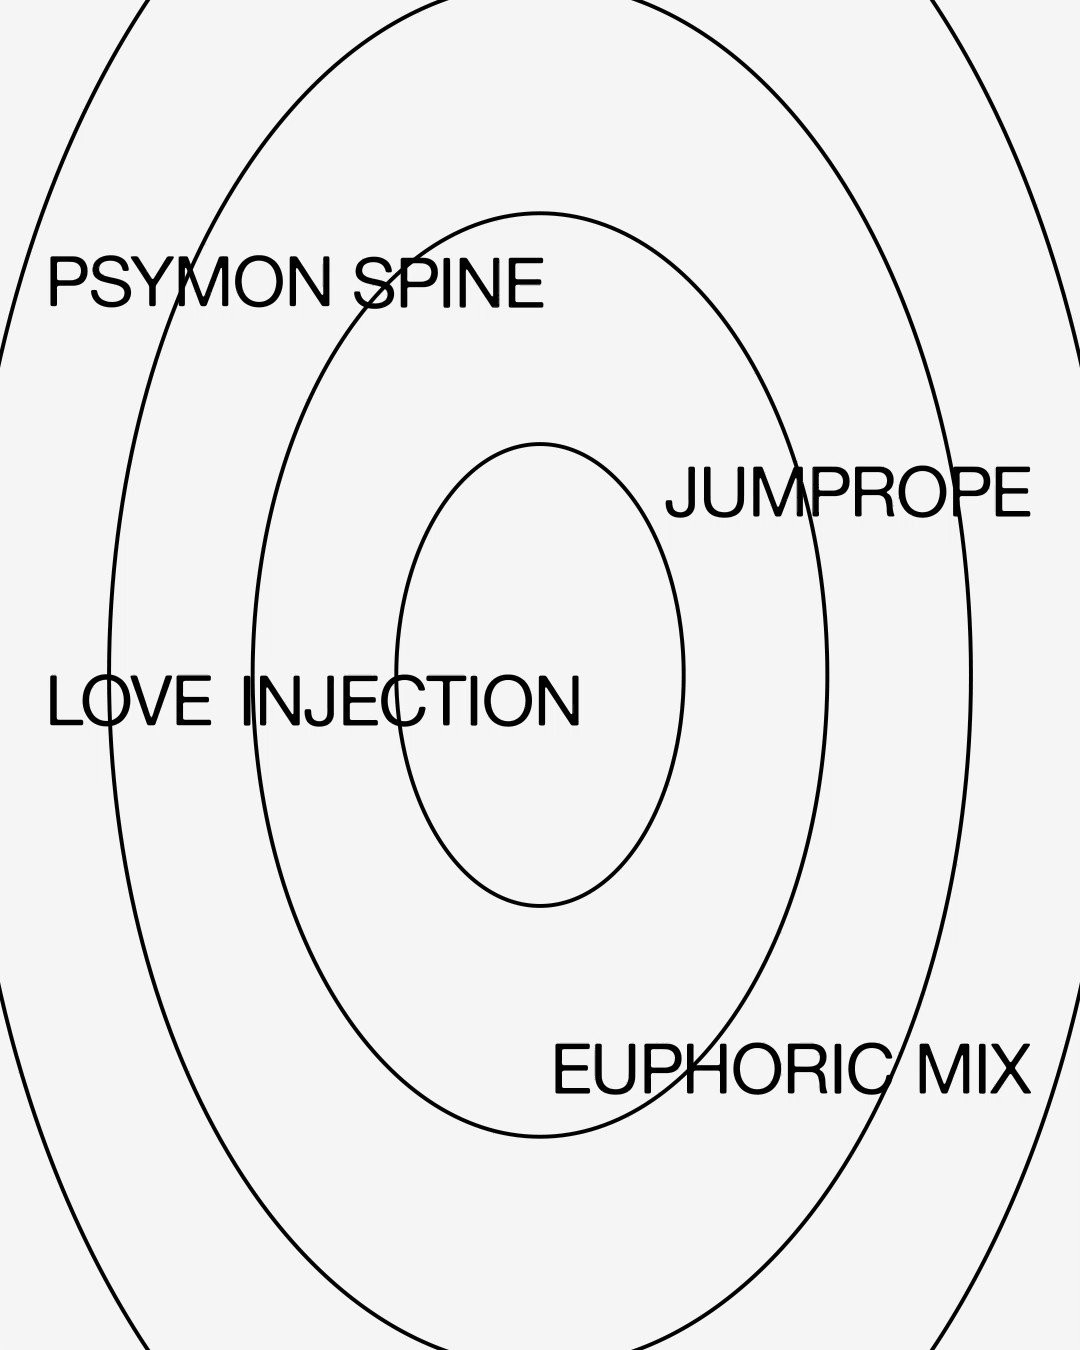 Love Injection Euphoric Mix Jumprope Psymon Spine